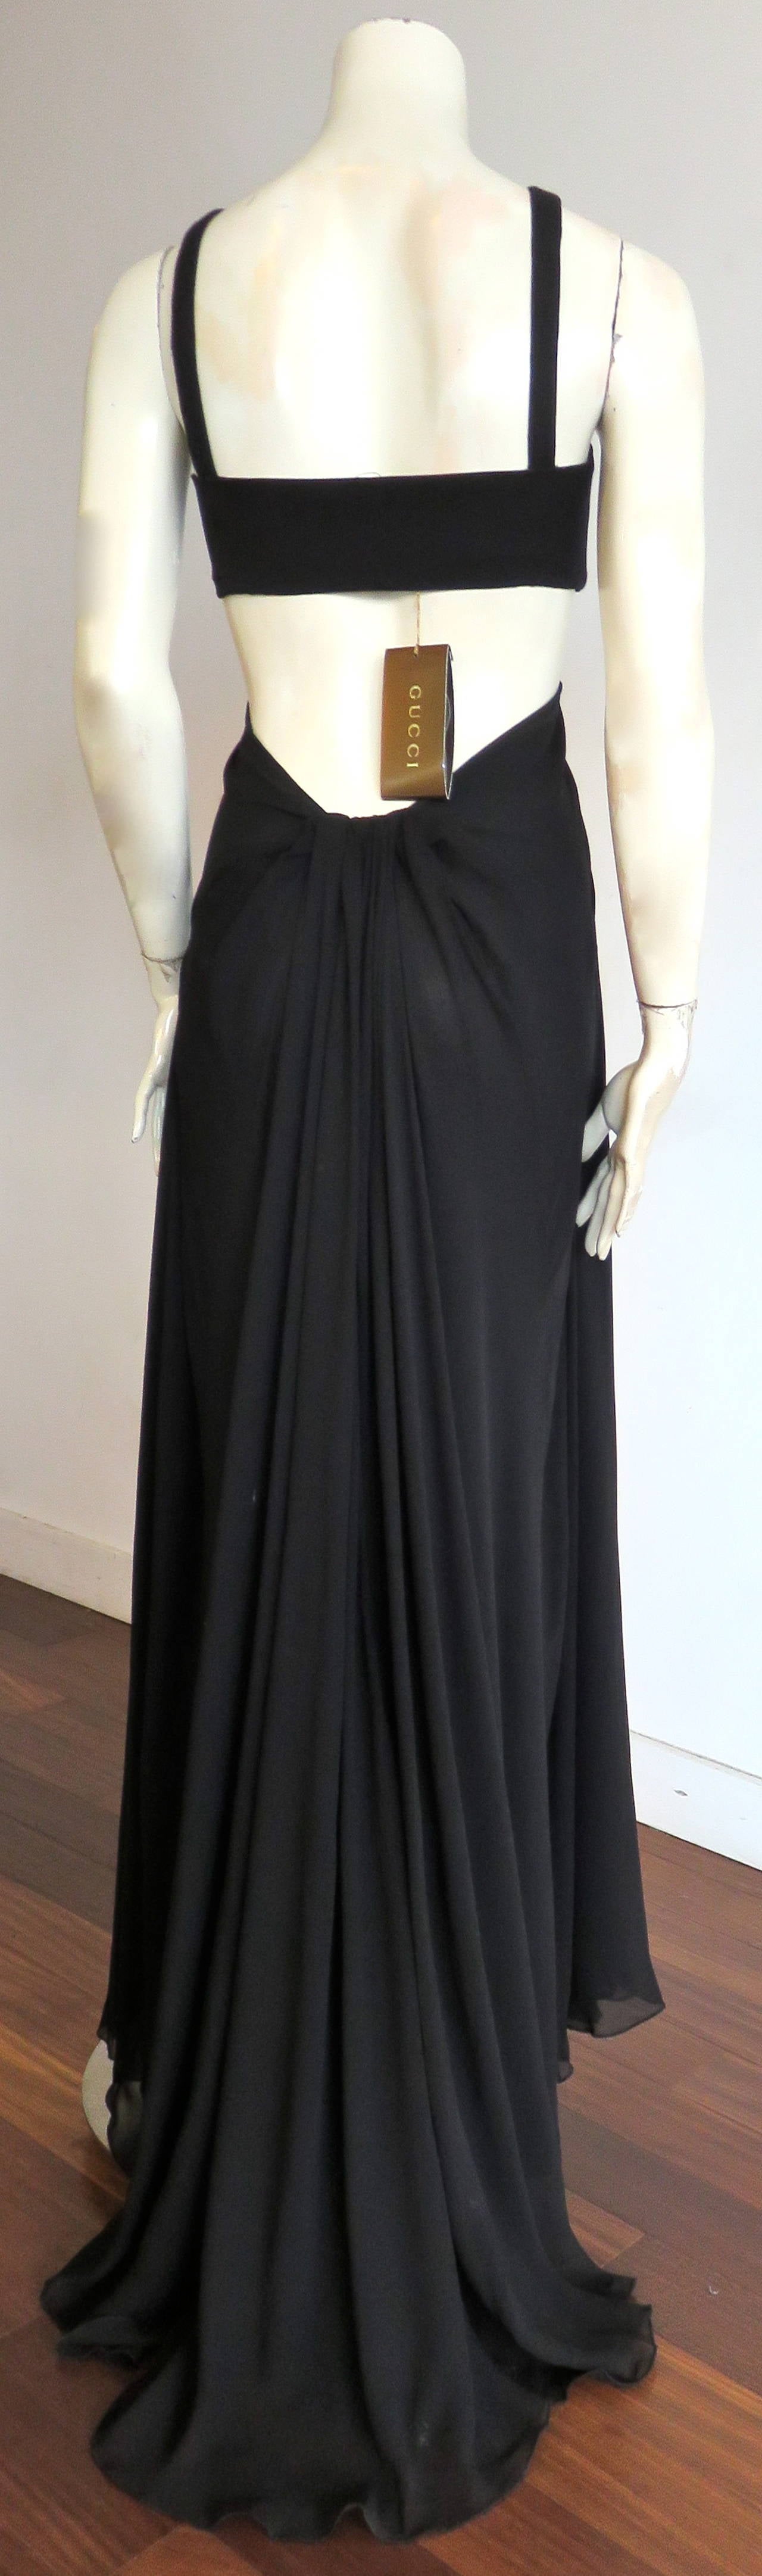 GUCCI by Tom Ford Black silk twisted drape cut-out dress - NWT For Sale 2